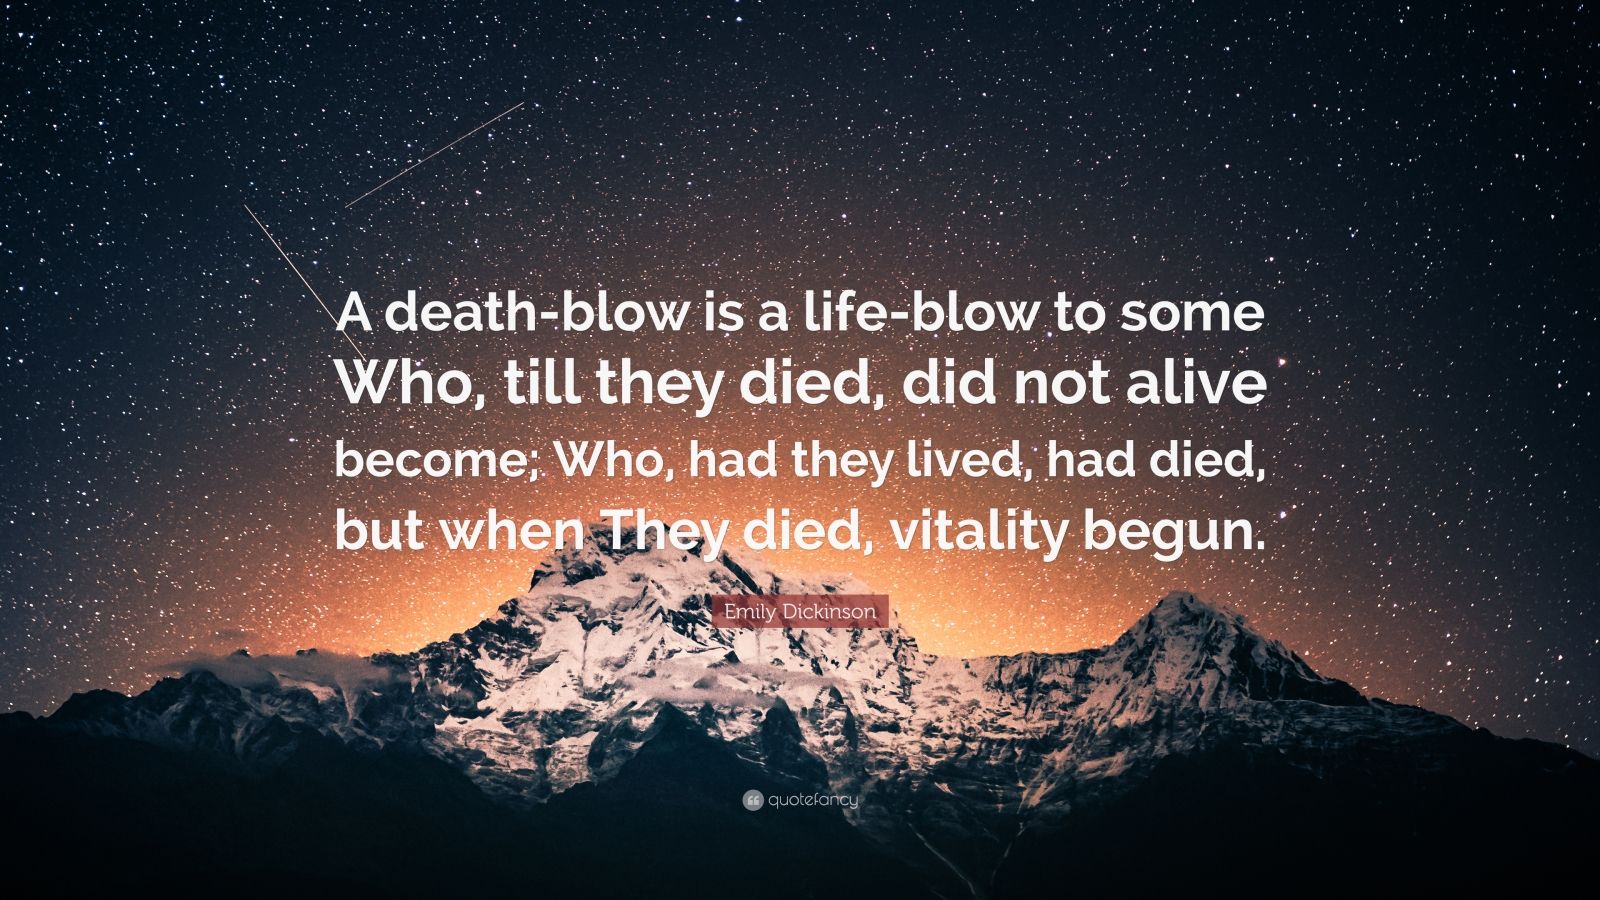 Emily Dickinson Quote: “A death-blow is a life-blow to some Who, till ...